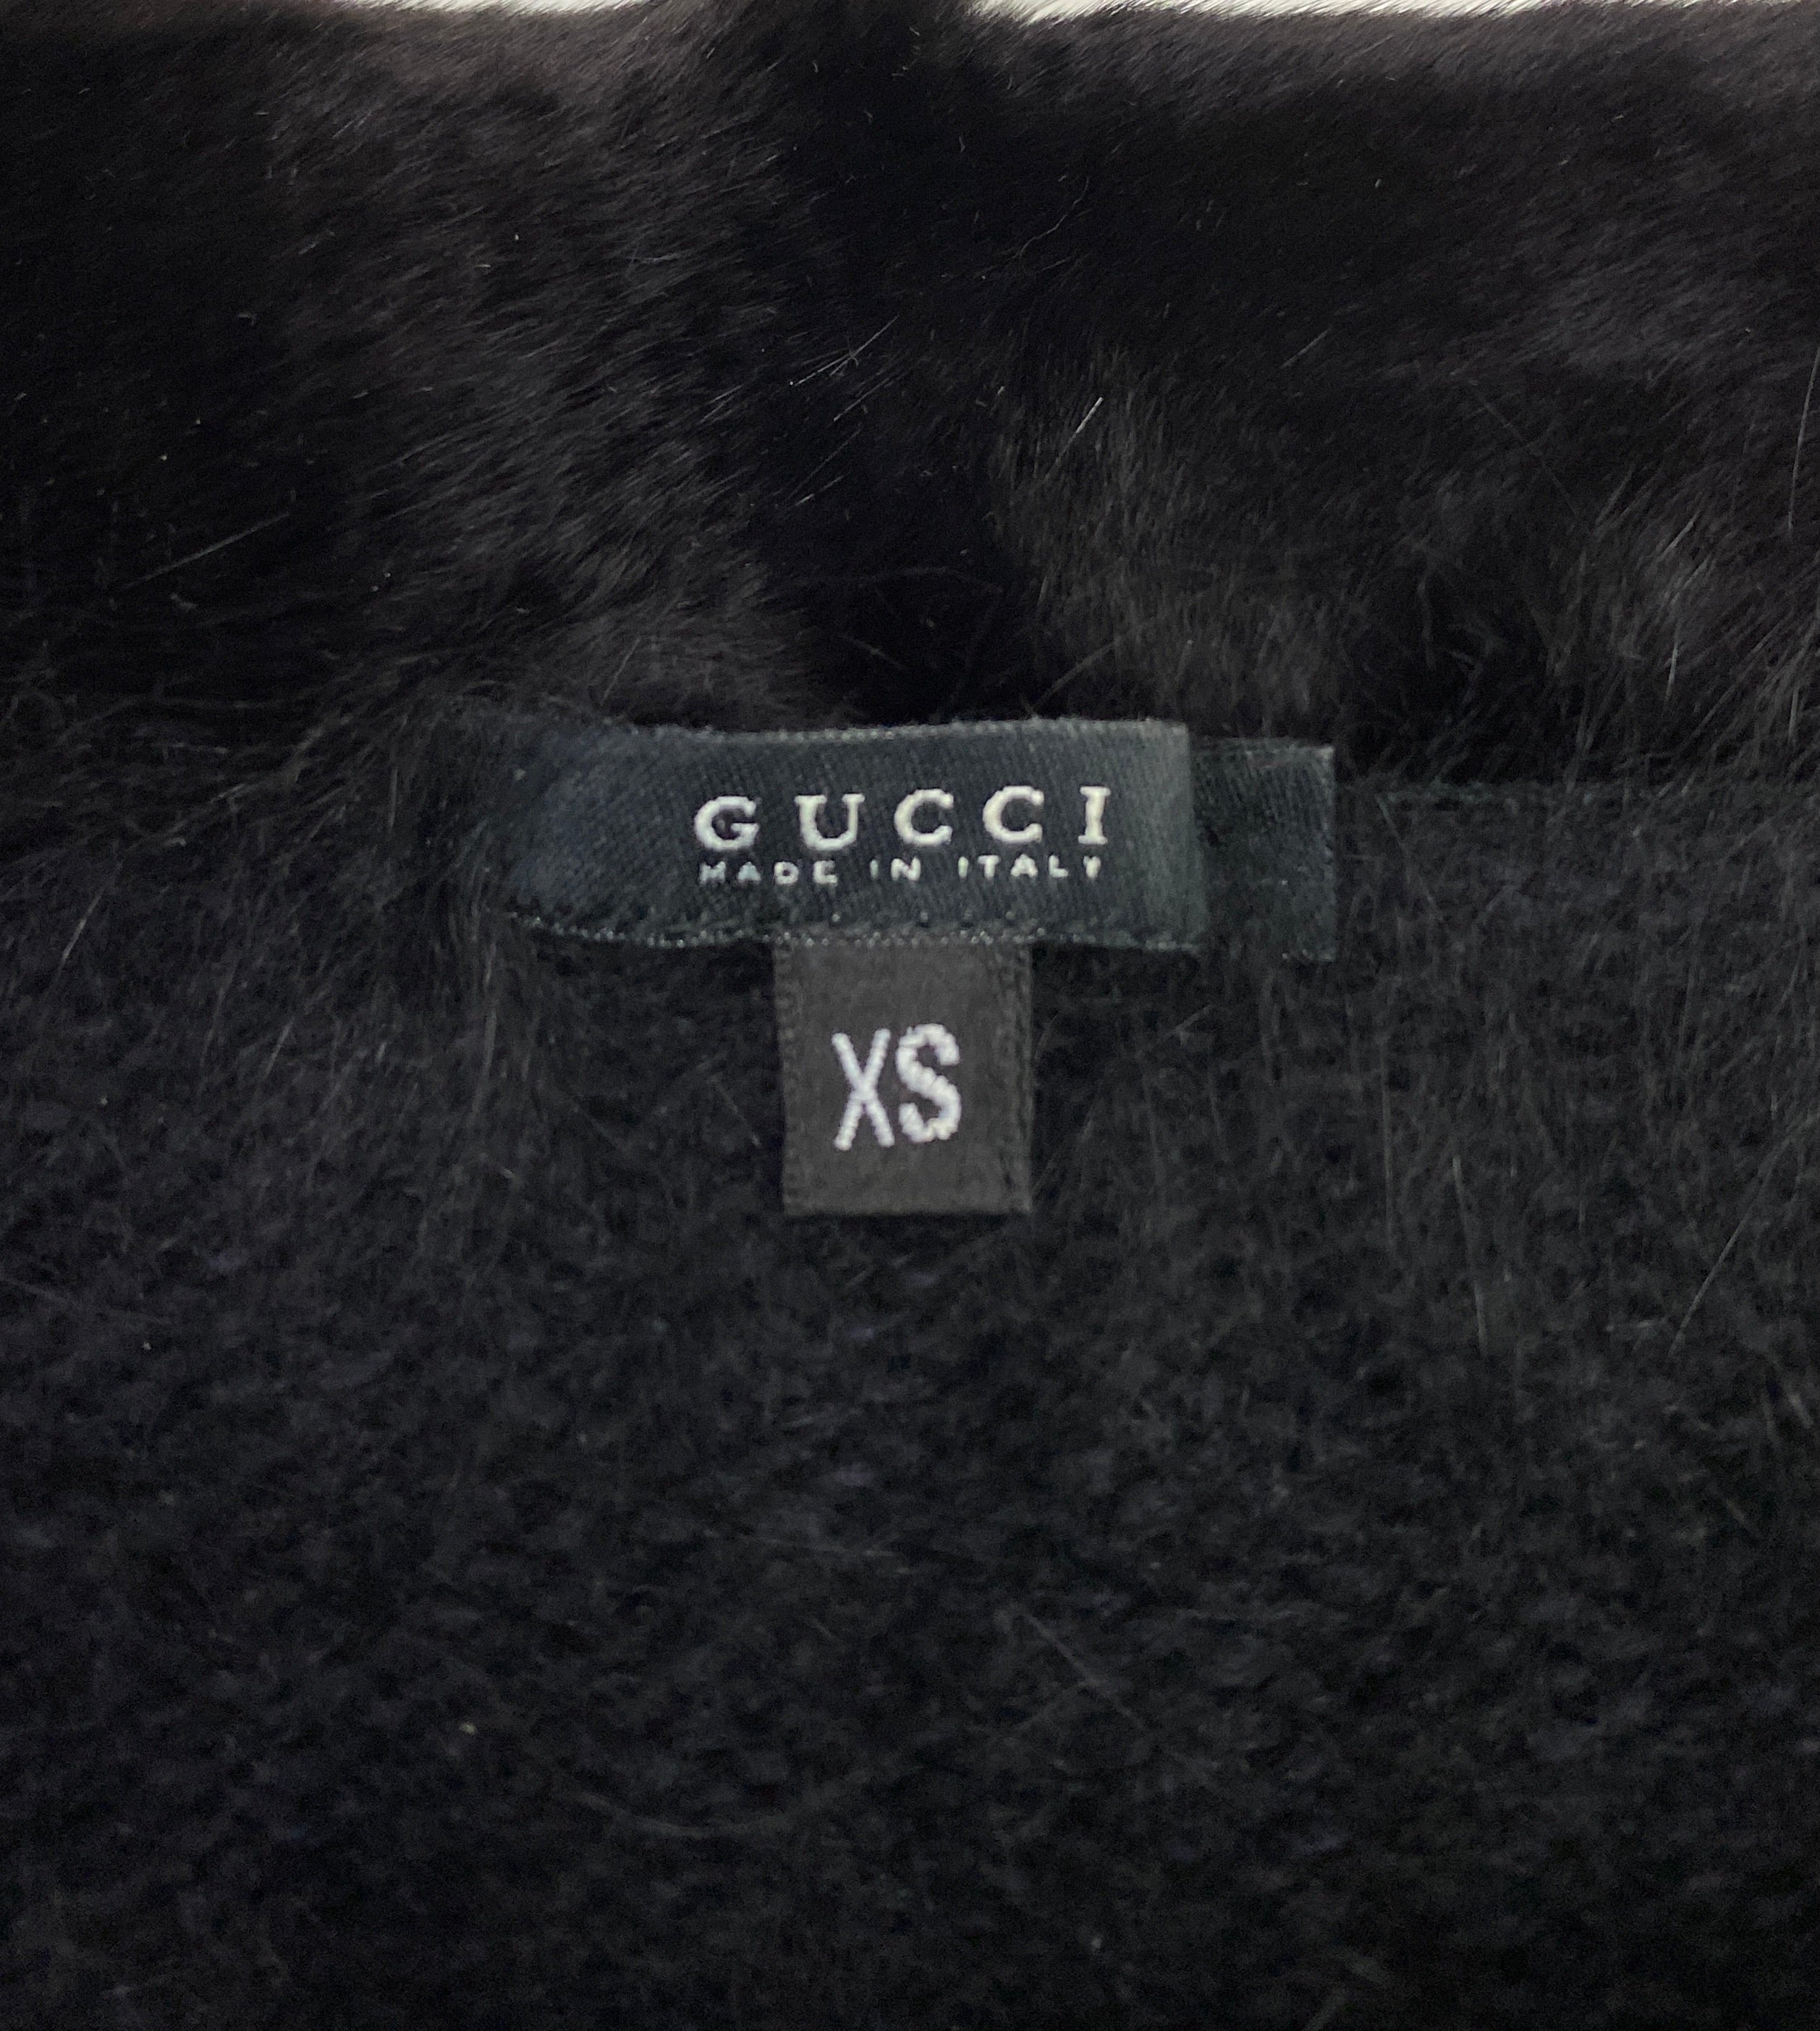 Gucci Fall 2001 Angora Sweater with Mink details